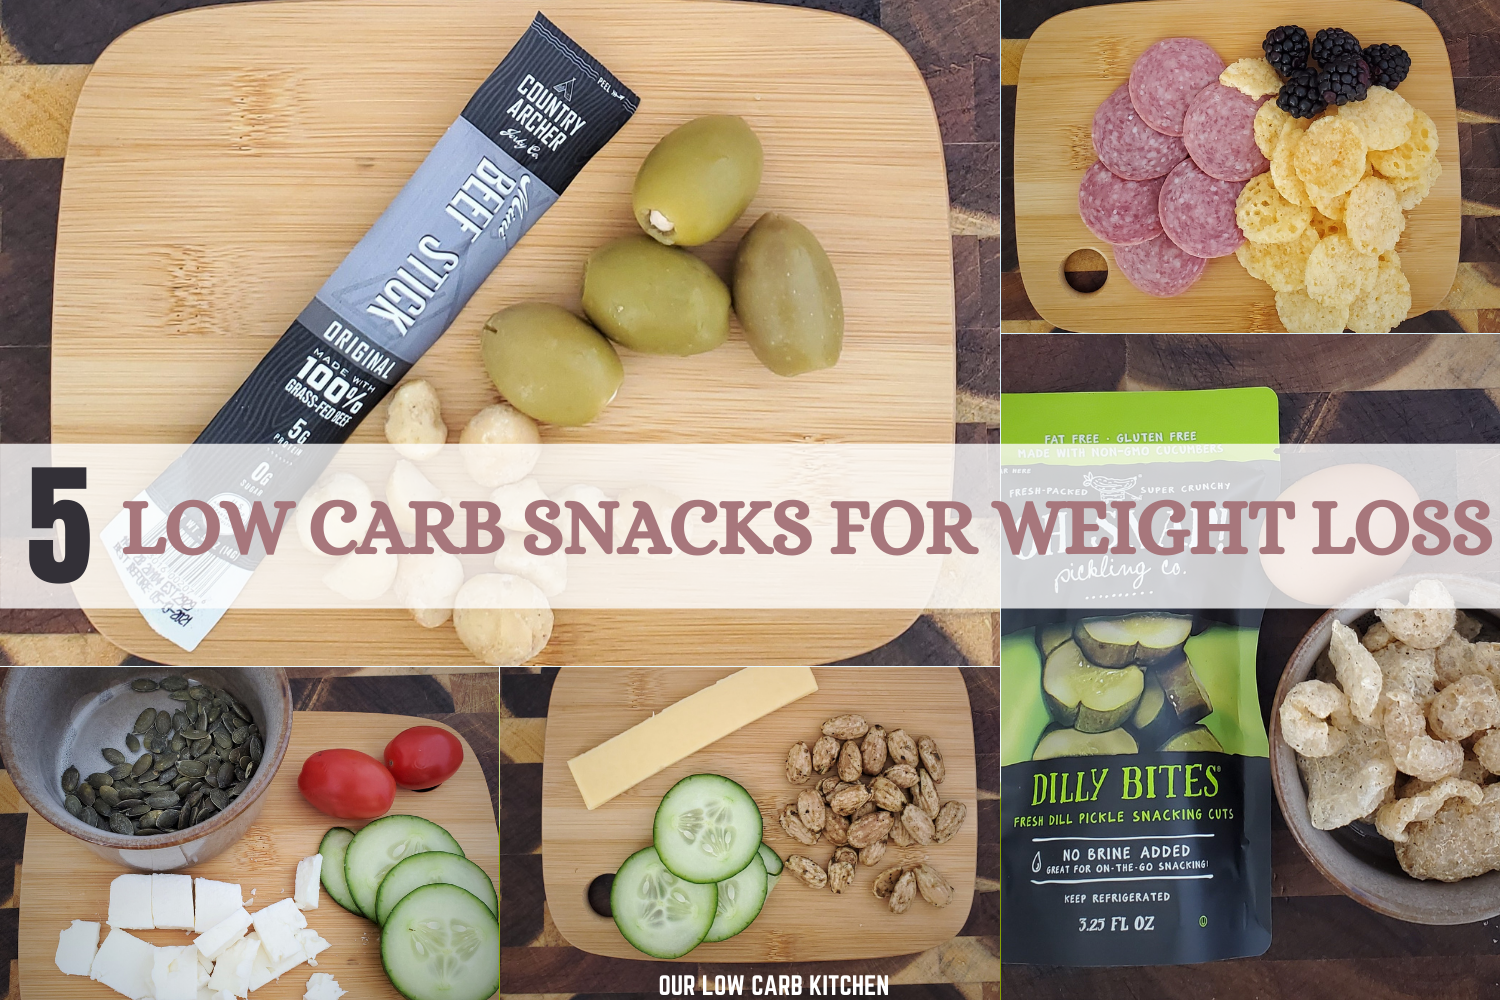 LOW CARB SNACKS FOR WEIGHT LOSS